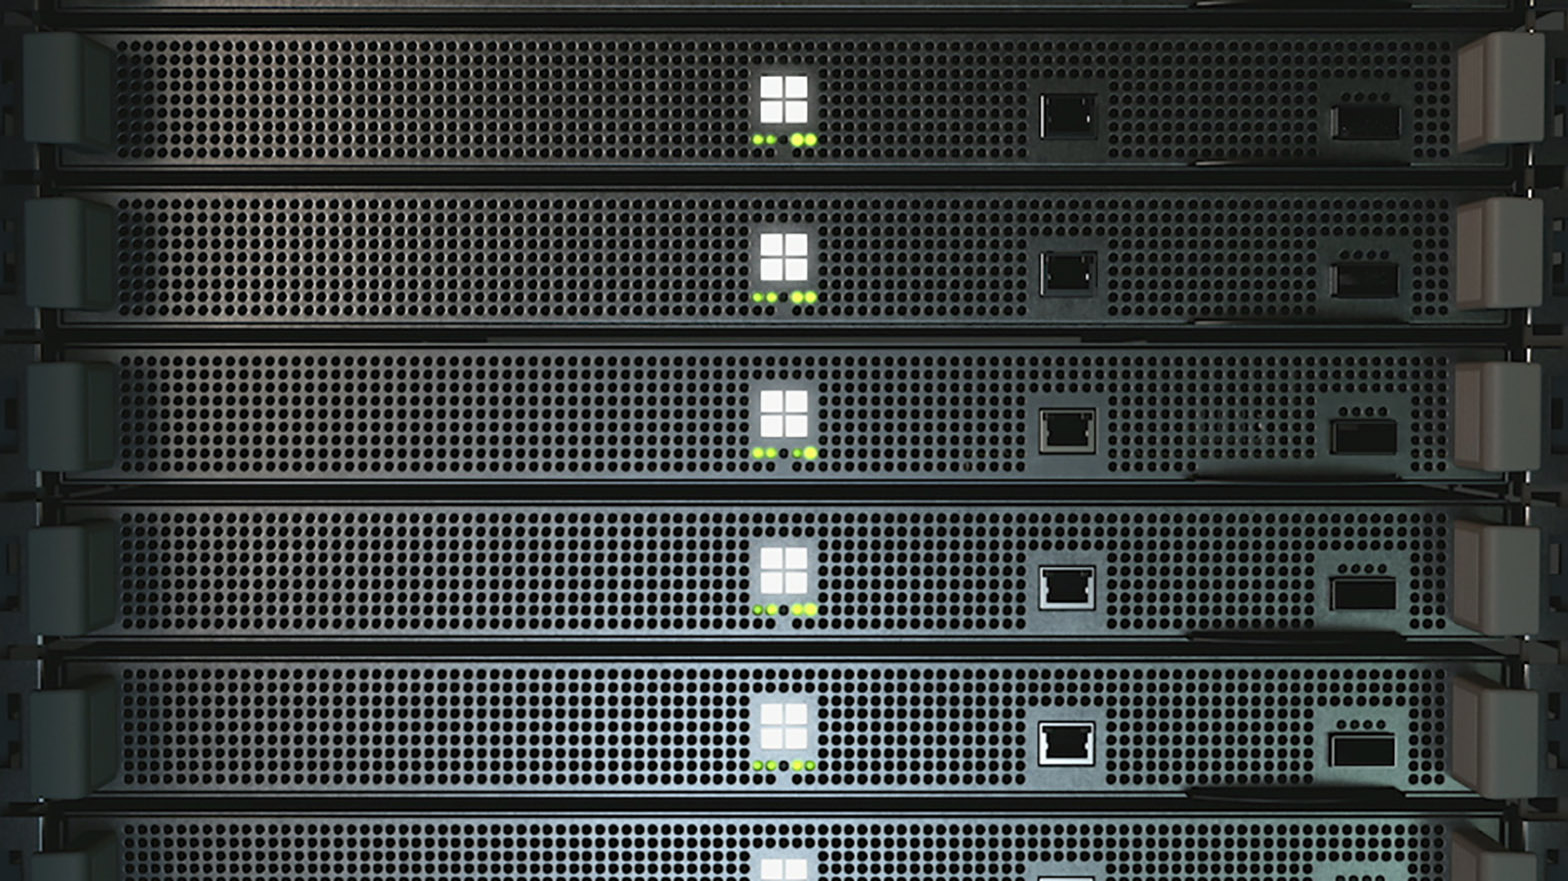 Project xCloud server blades in a stack